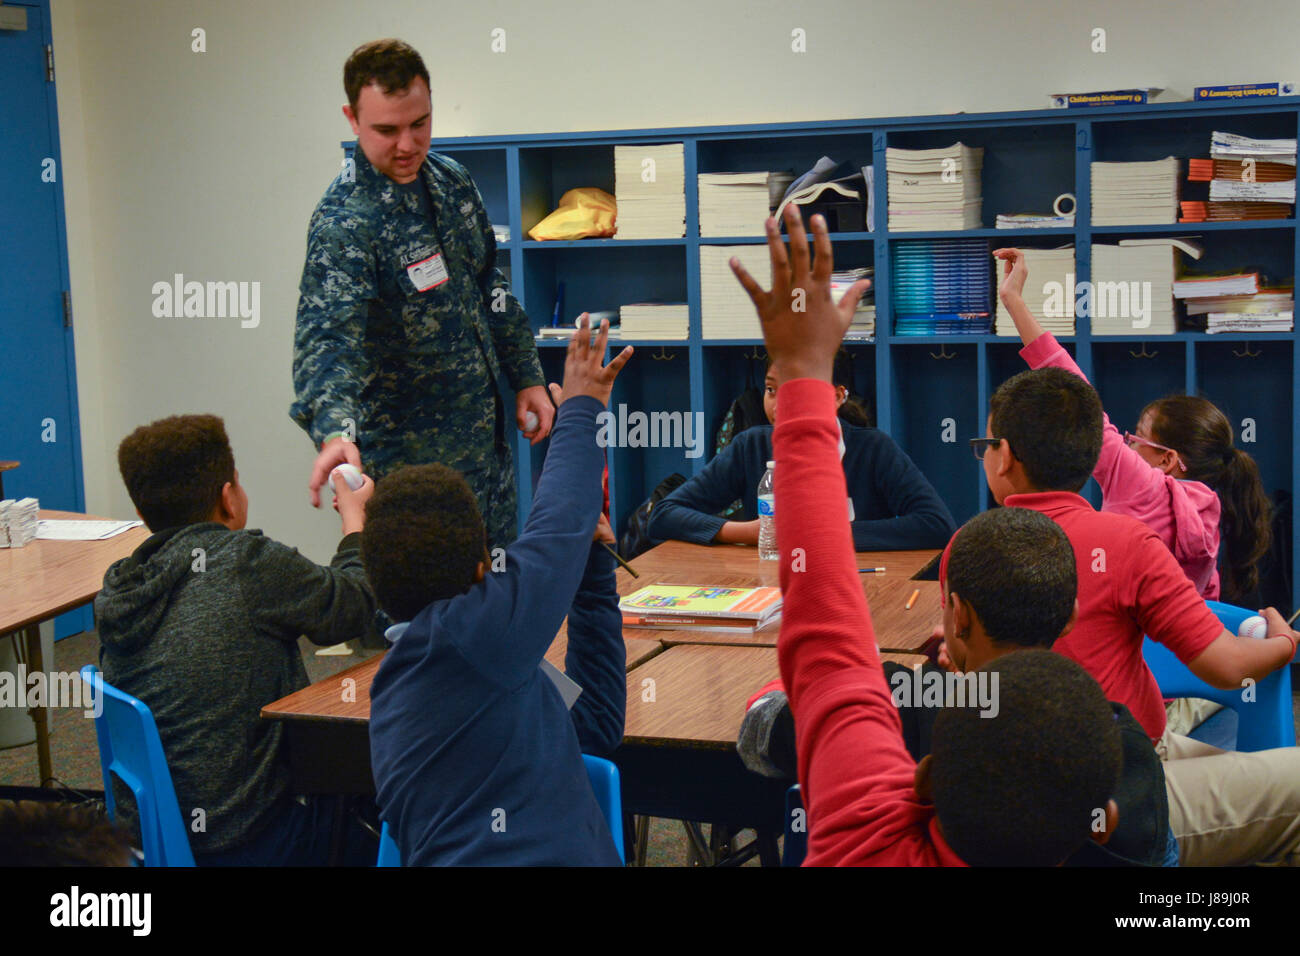 170519-N-IG780-048 IRVING, Texas (May 19, 2017) Machinist Mate 2nd Class Adam Al Sharif, a recruiter assigned to Navy Recruiting District (NRD) Dallas, answers questions from students at Thomas Haley Elementary School during Career Day. NRD Dallas encompasses 150,000 square miles that includes Northwest Texas and Oklahoma. (U.S. Navy photo by Mass Communication Specialist 2nd Class Shane A. Jackson/Released) Stock Photo